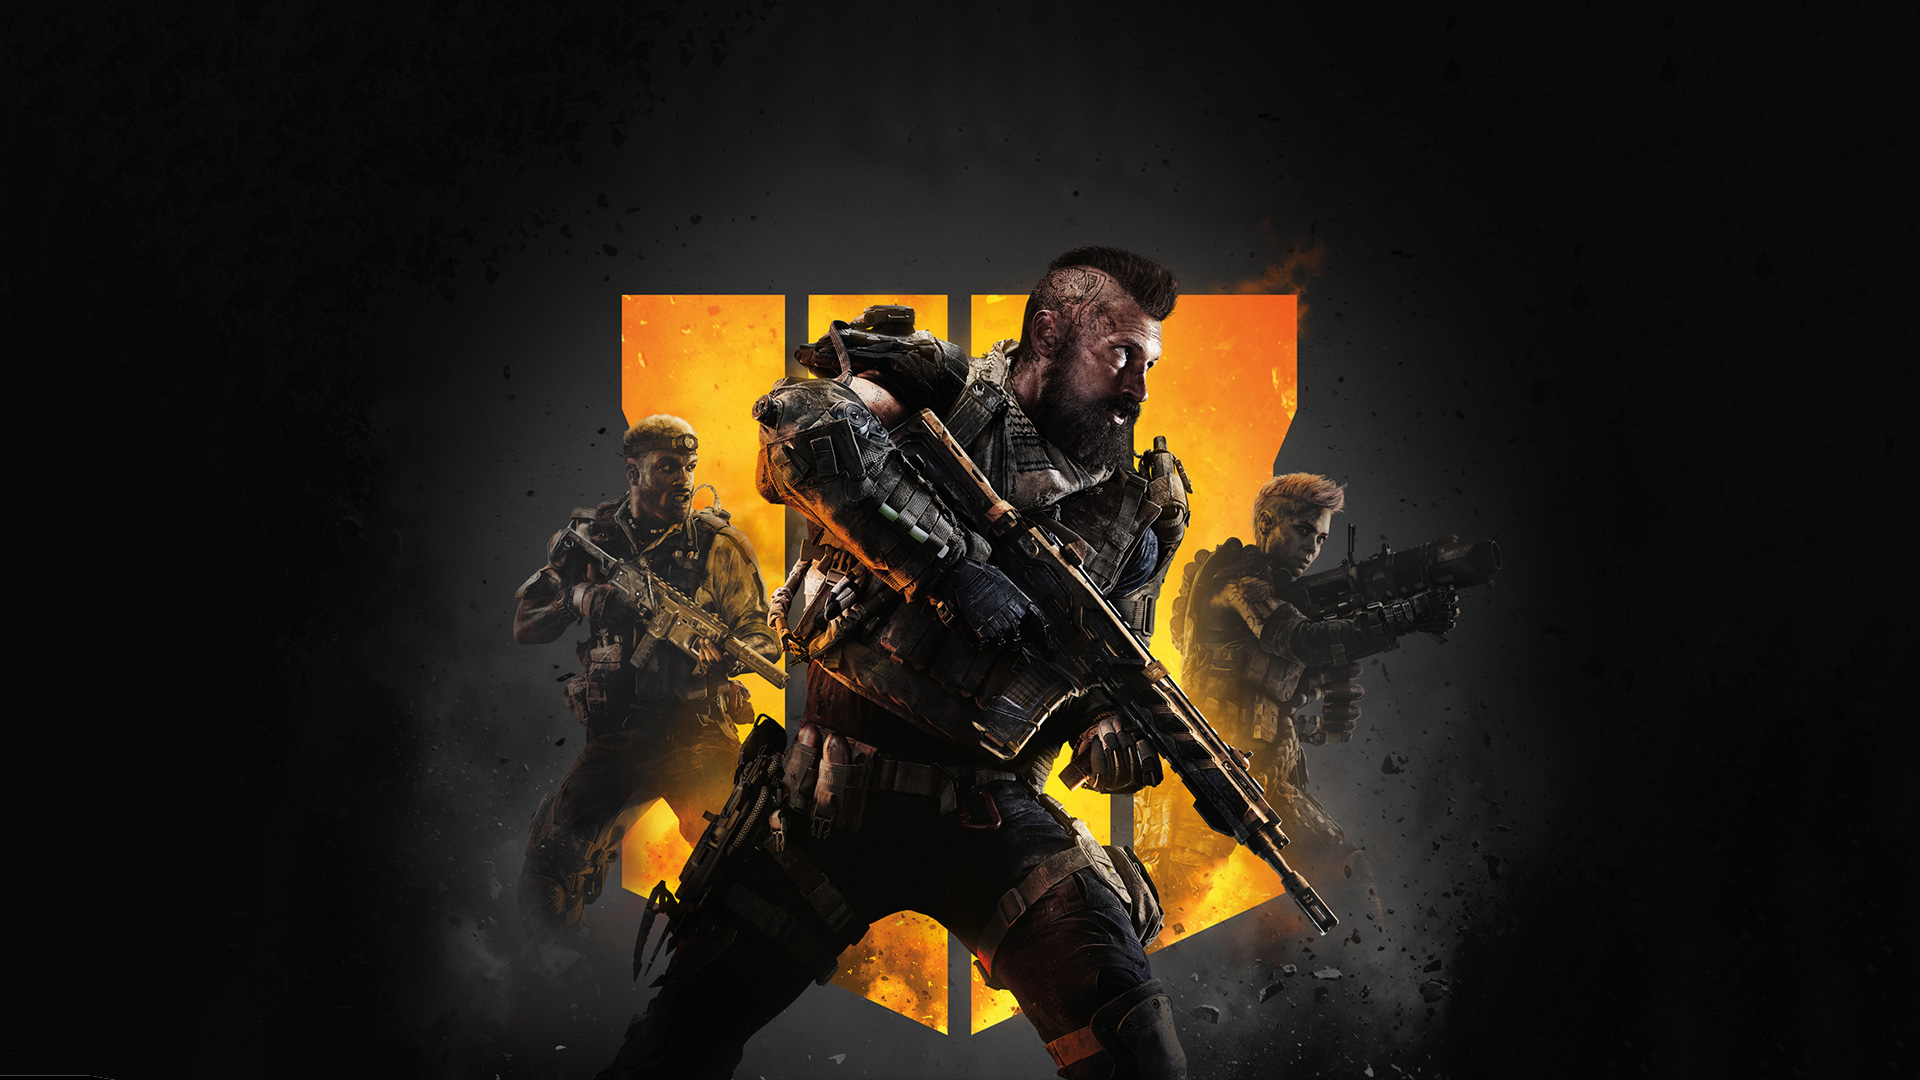 What is Call of Duty: Black Ops 4?